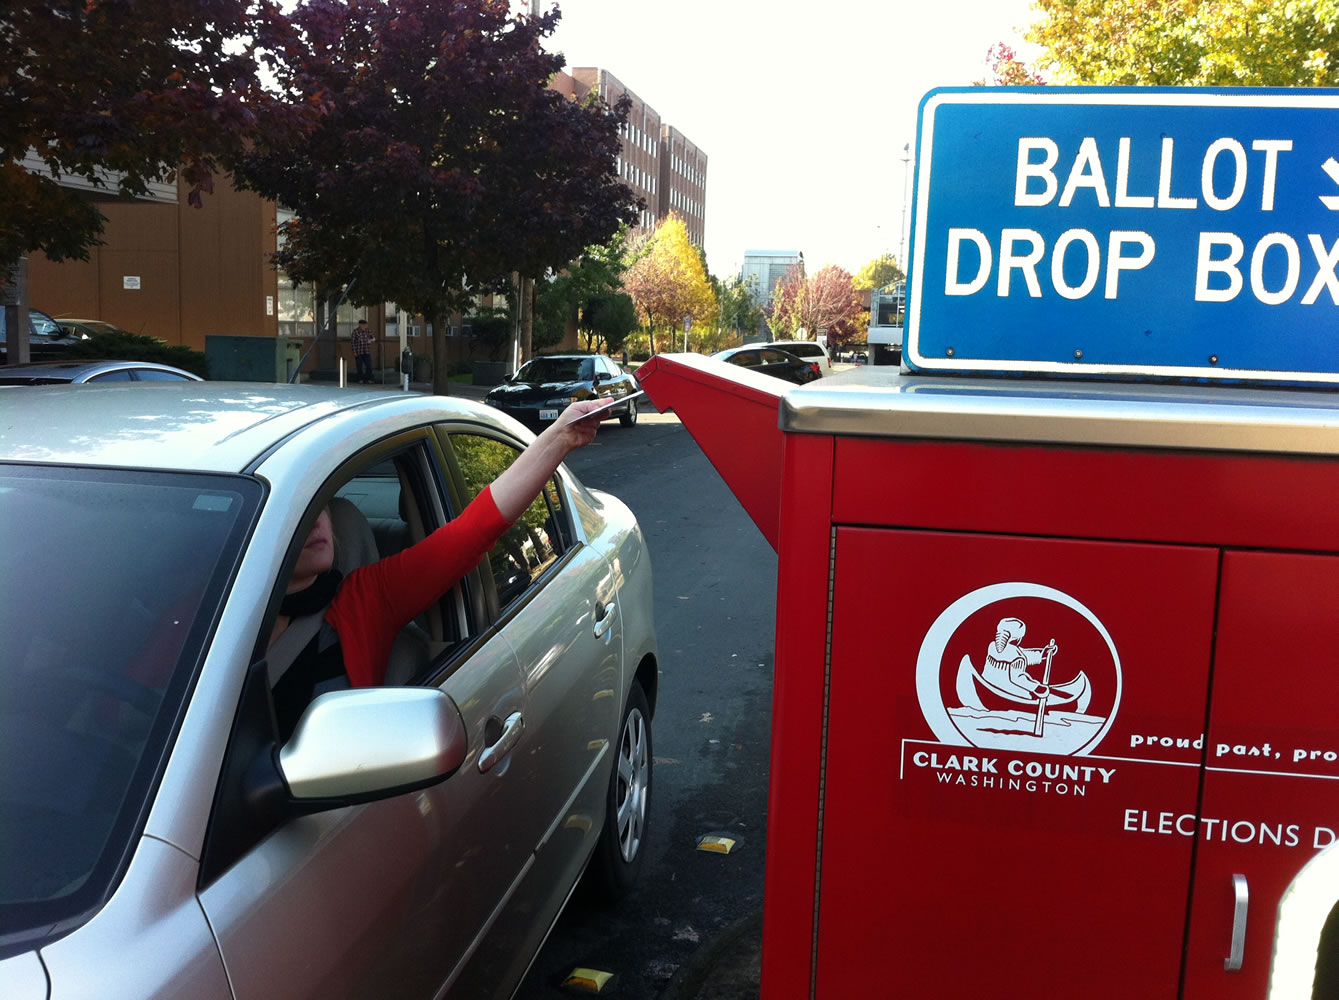 A steady stream of cars visits the ballot drop box at West 14th and Esther streets every major election.